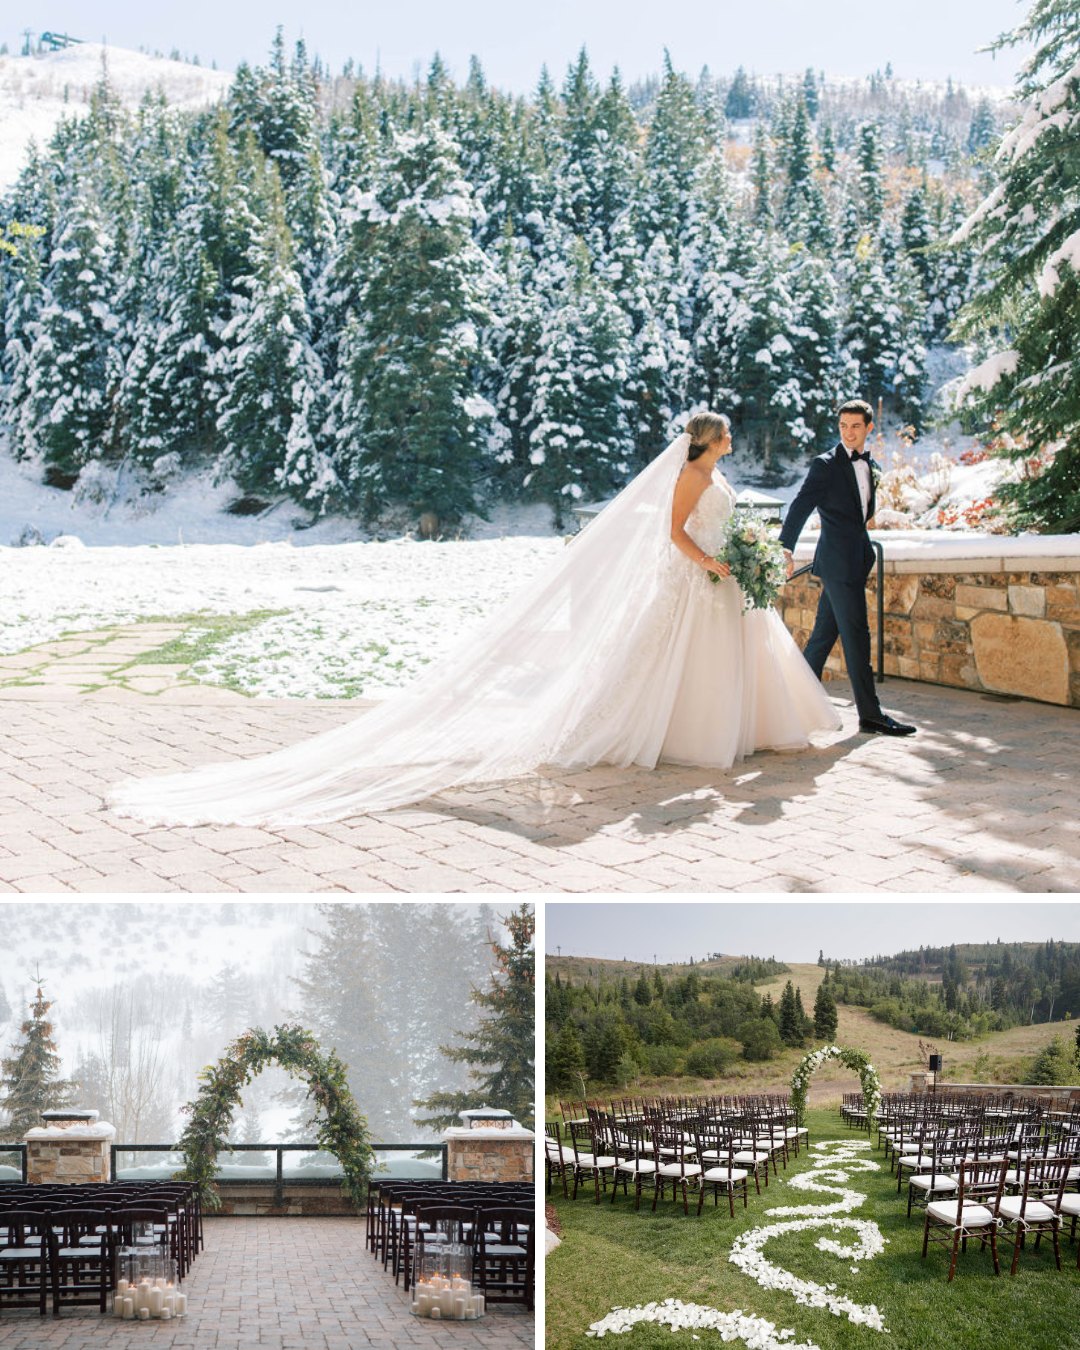 couple walking by trees with some snow hanging on, ceremony set up with floral arch and snowy hill, ceremony setup near mountain base